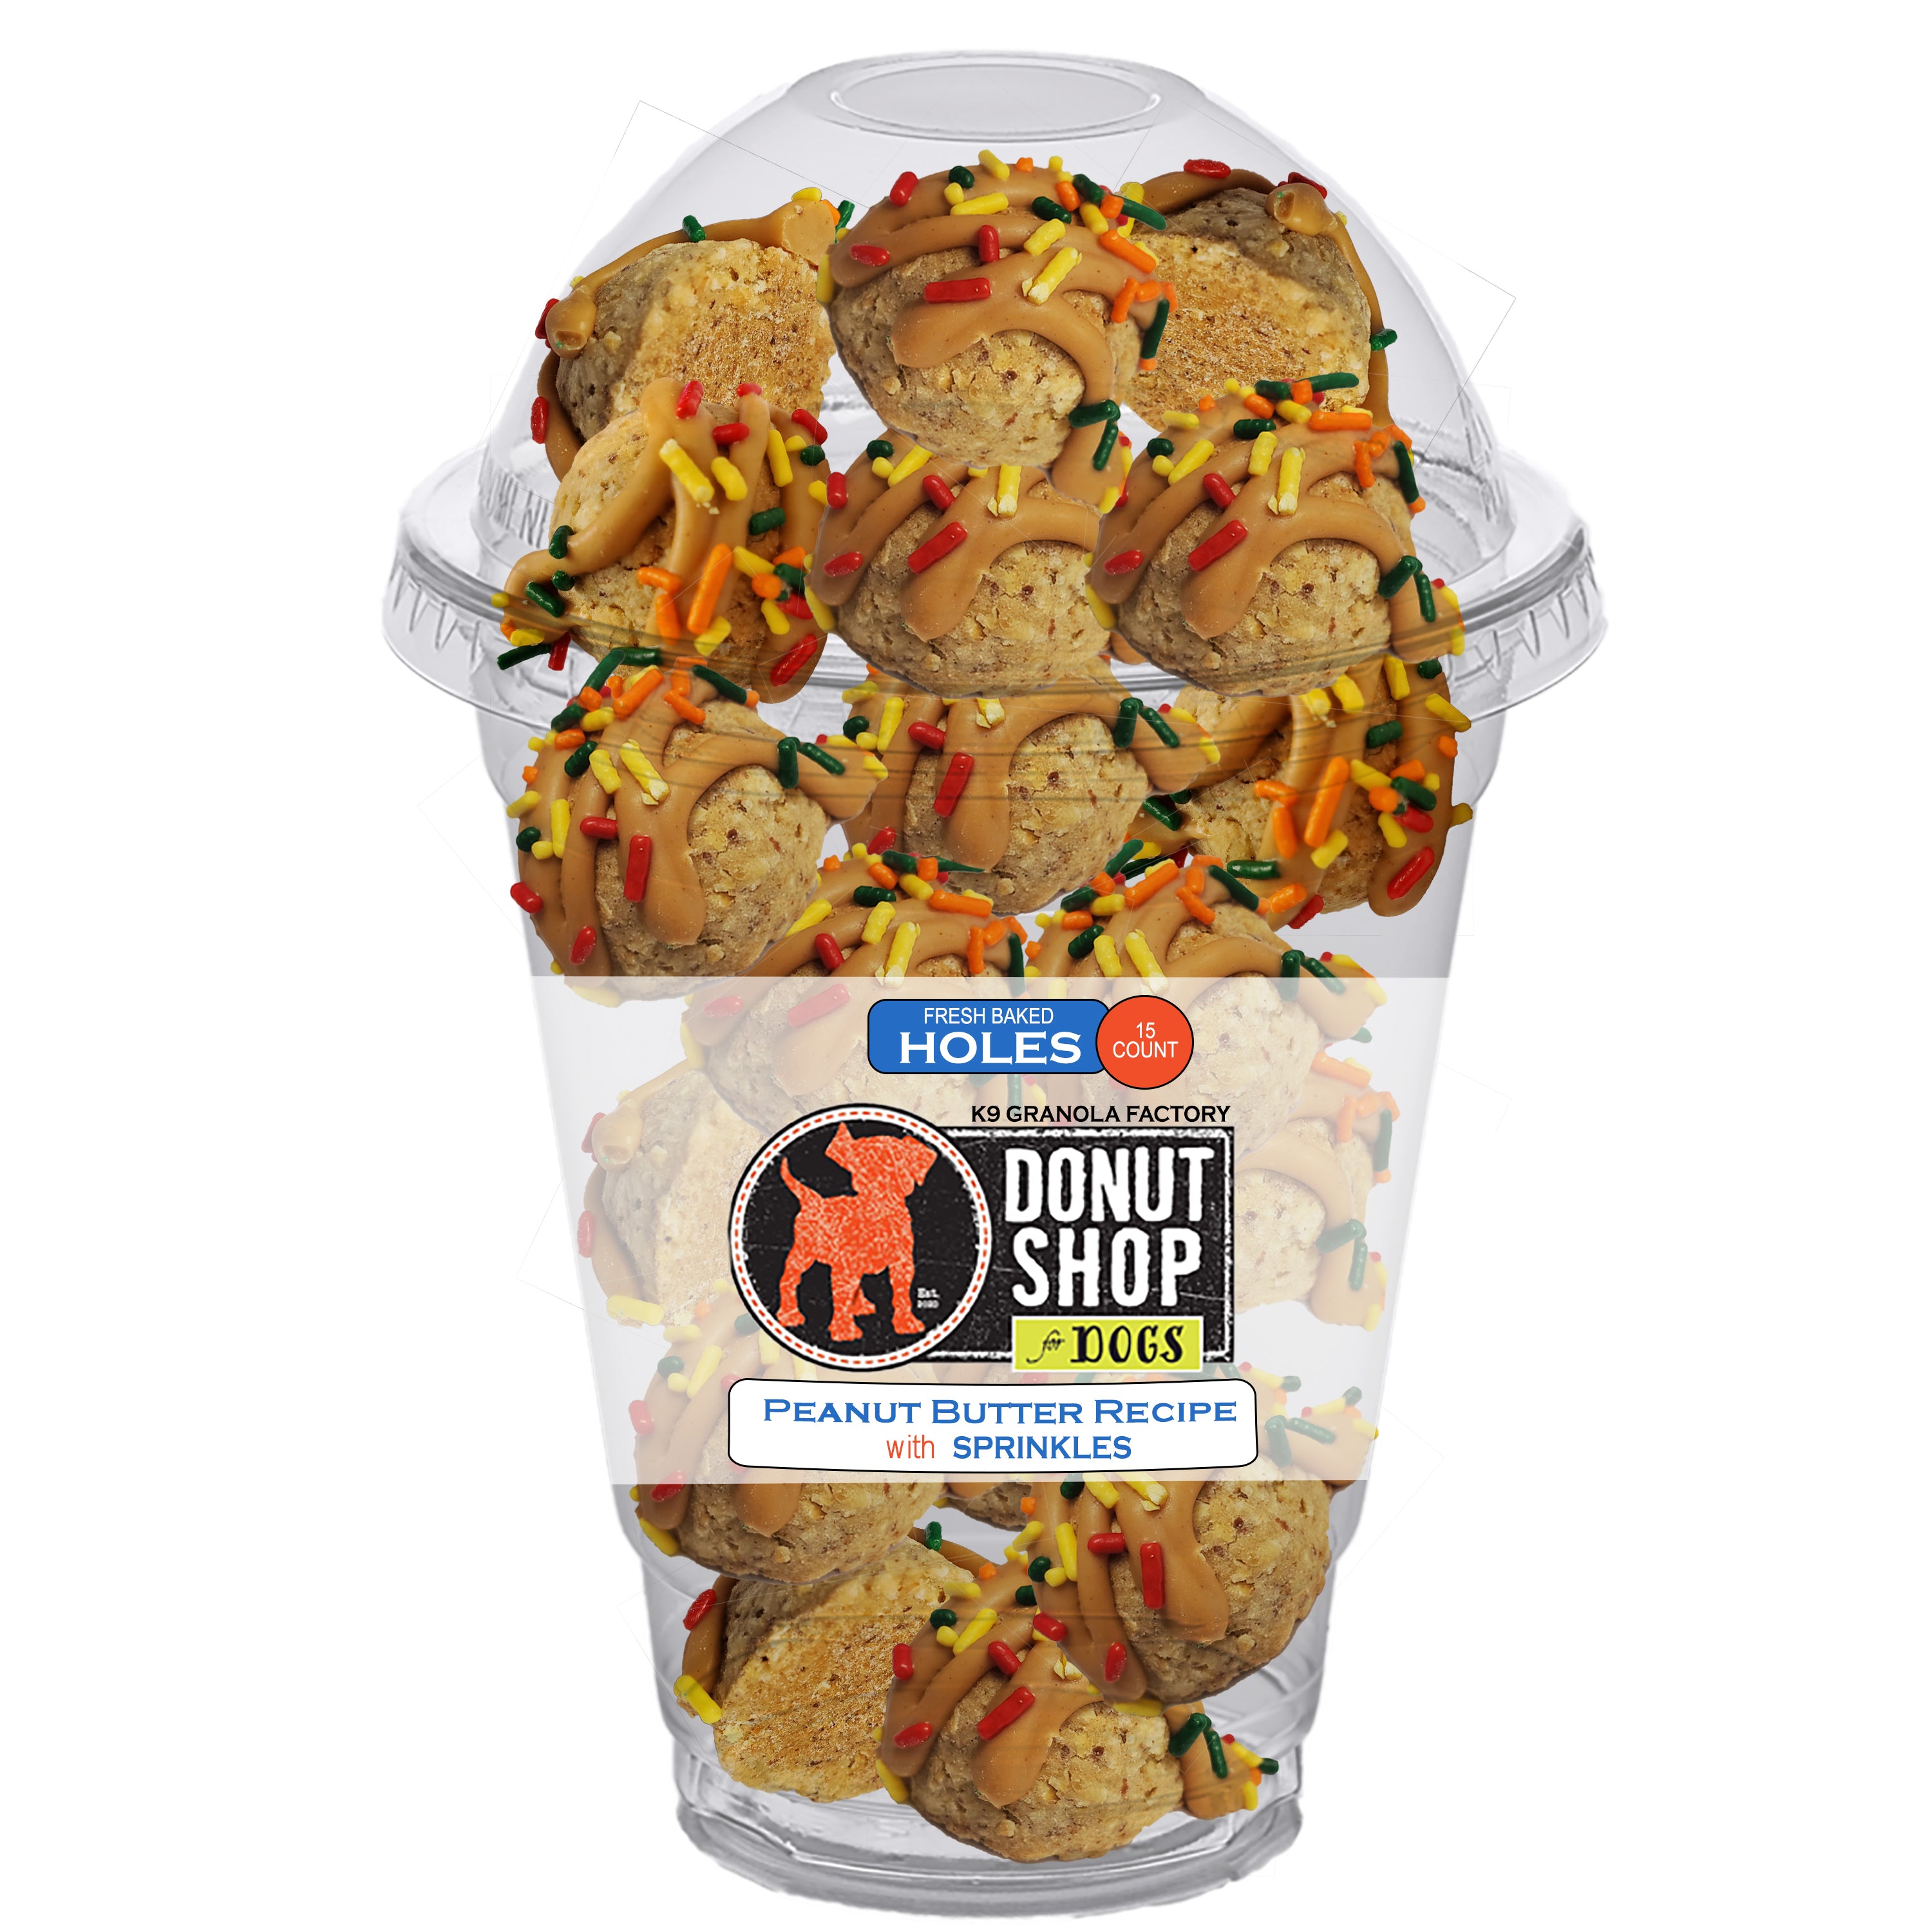 K9 Granola Factory Donut Shop Donut Holes For Dogs, Peanut Butter with Sprinkles, 15ct